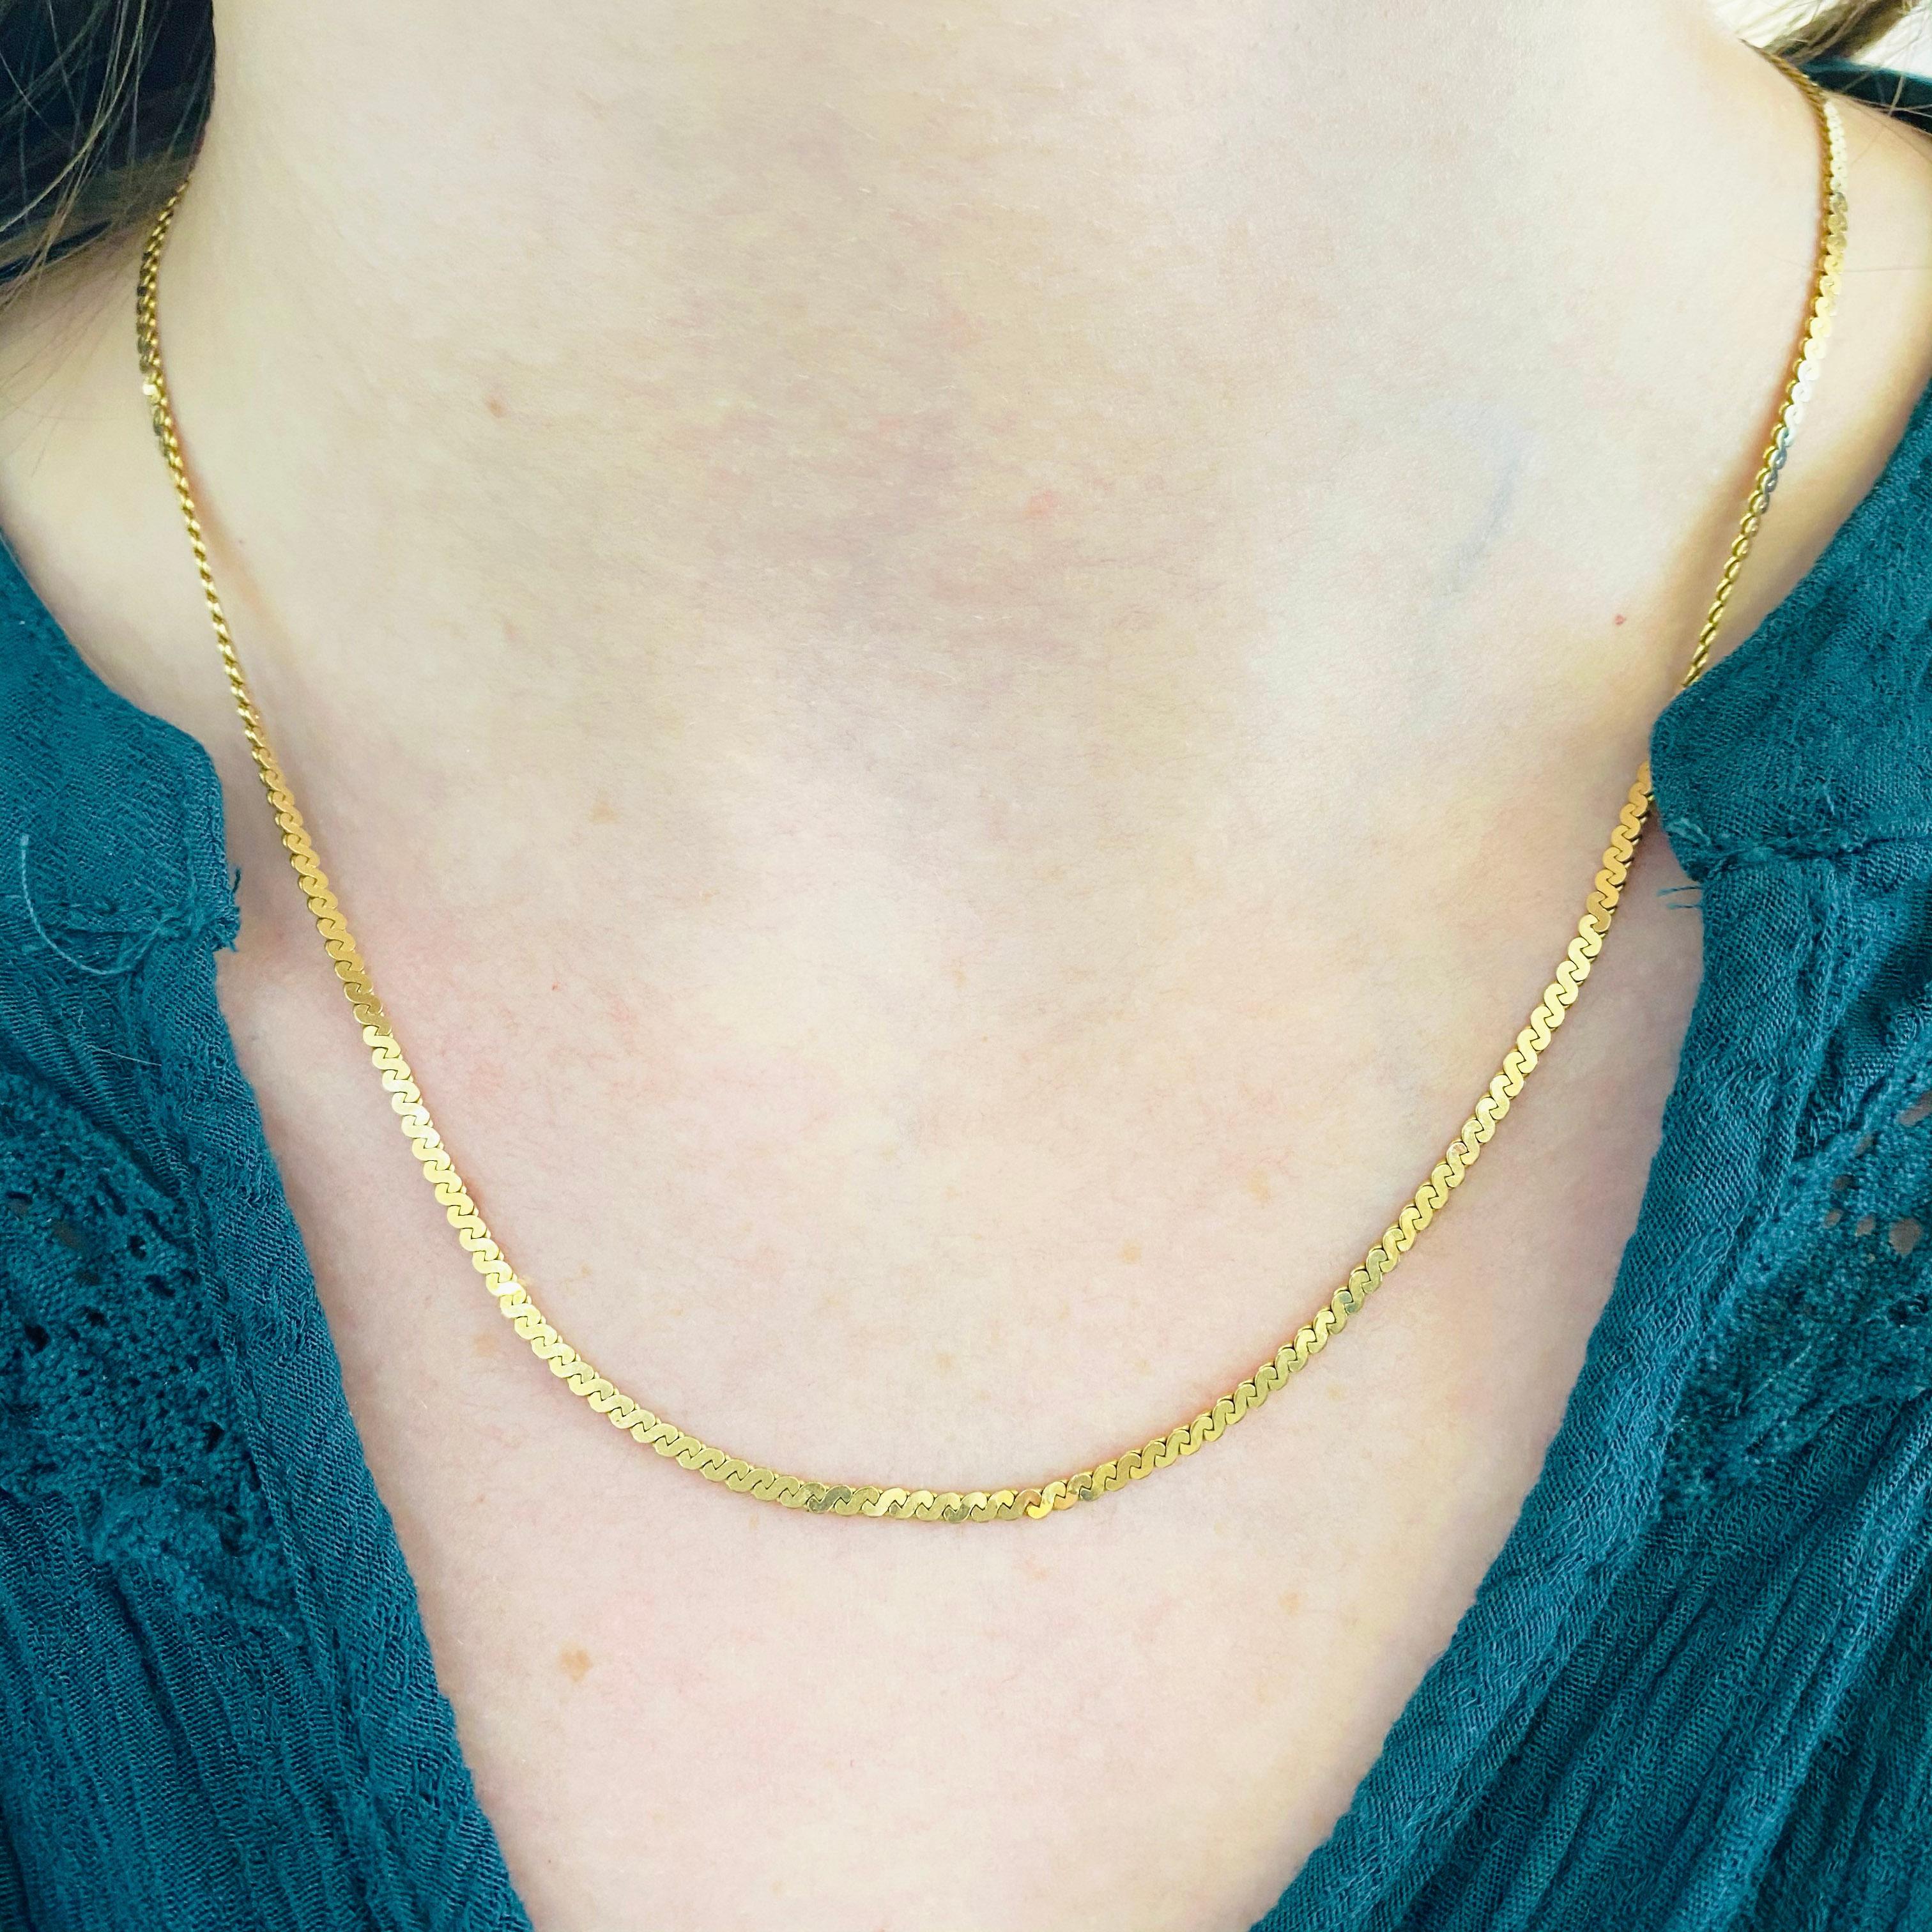 This serpentine chain is fluid and flexible and lays flat against the skin for a comfortable wear. This hand polished 14kt serpentine chain is a unique chain look that’s sure to get you noticed.

The details for this beautiful necklace are listed